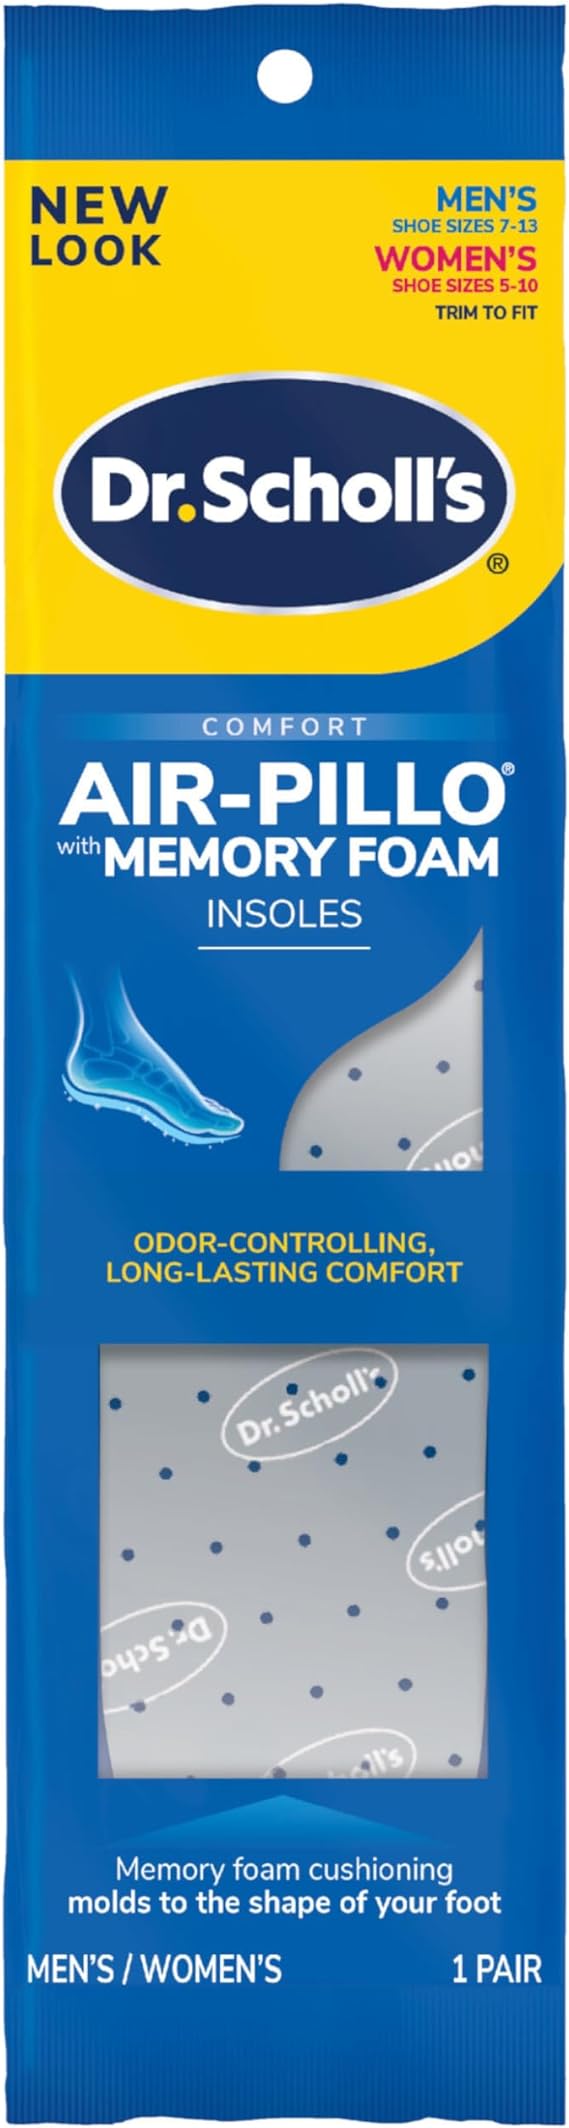 Dr. Scholl's Double Air Pillo  1 pair Insole Unisex (Pack of 6) mens size 7-13, Womens size 5-10